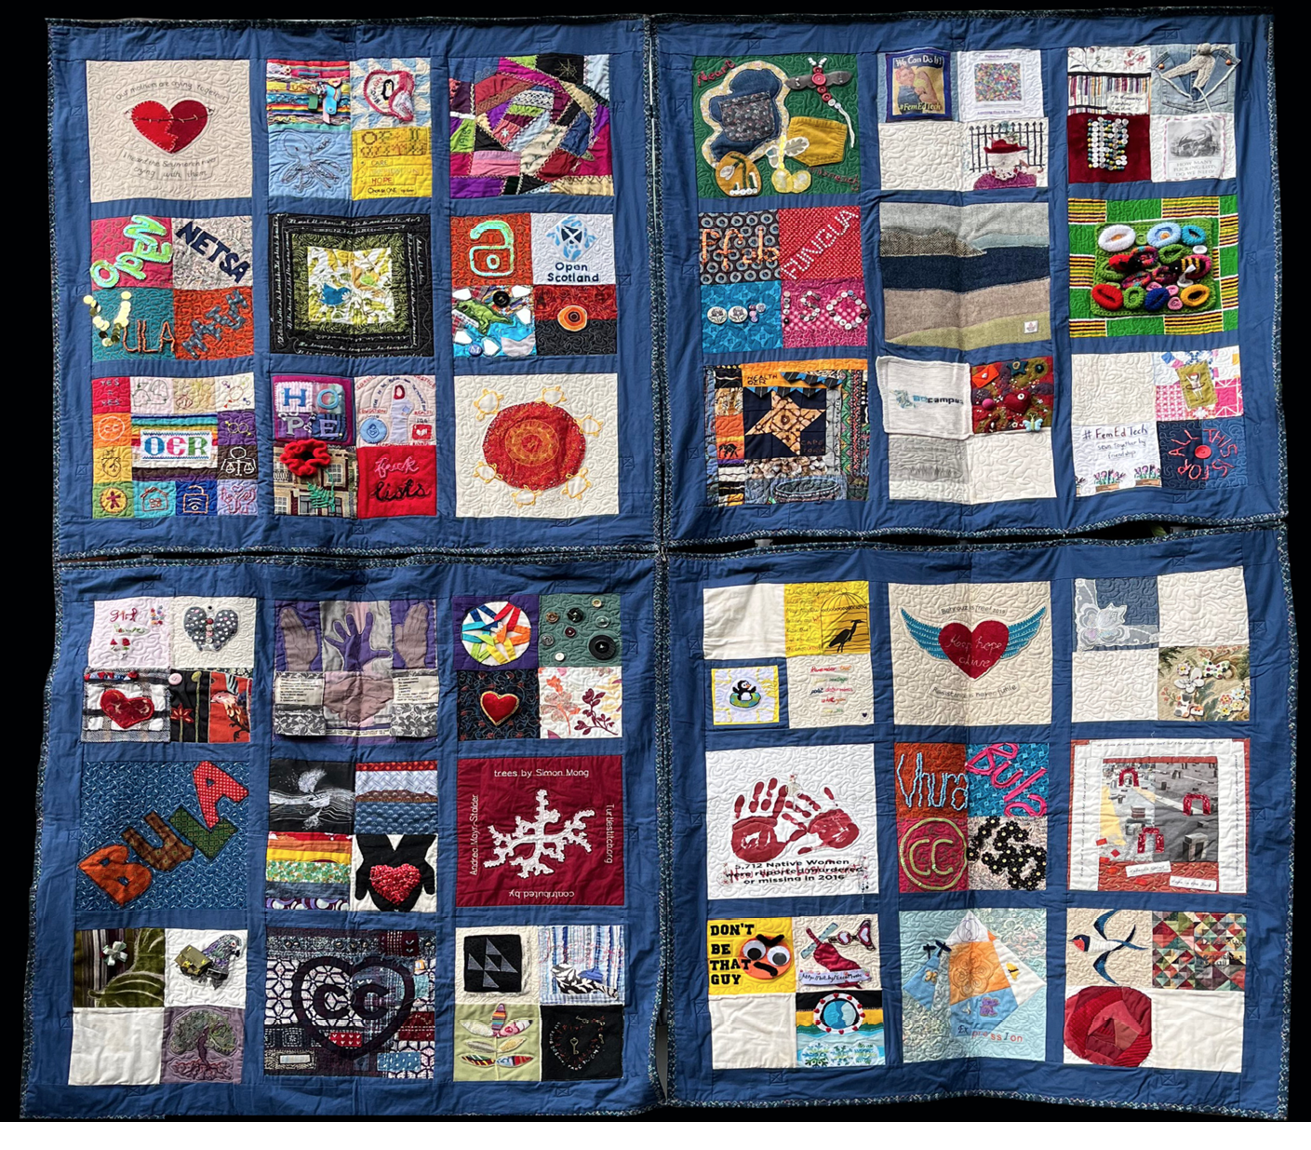 Quilt made of four hemmed pieces of blue fabric sewn together in two layers, one above the other. Each piece has nine fabric squares stitched to it presenting various images.